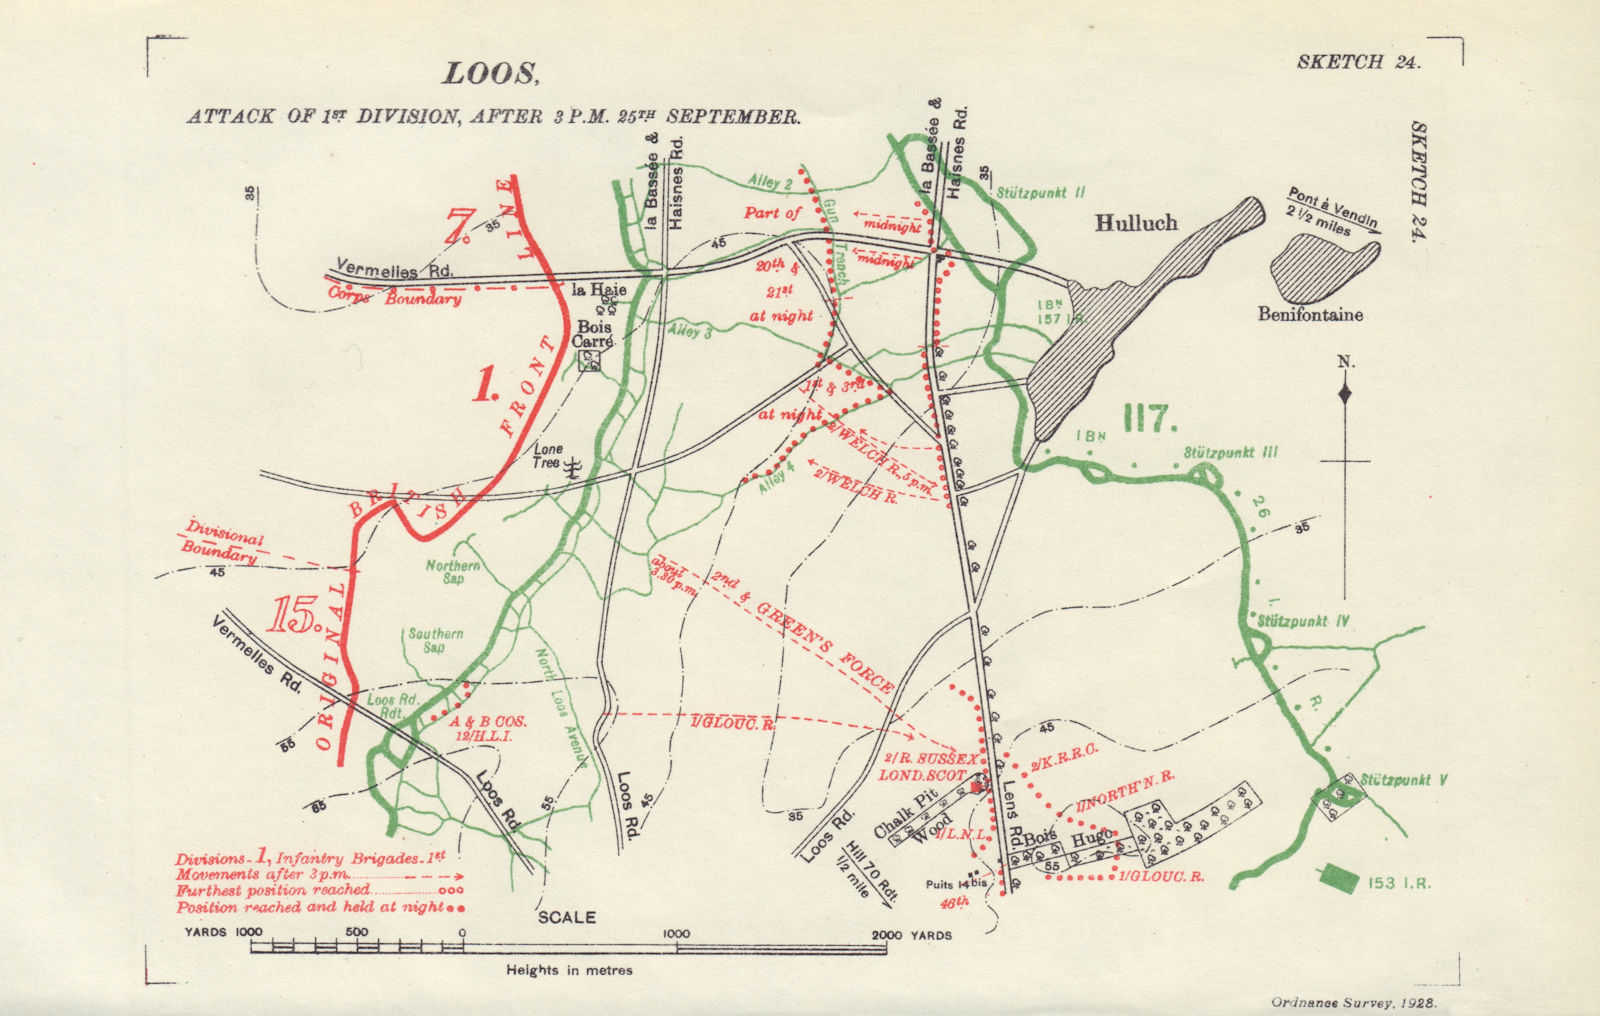 Battle of Loos, 1st Division attack 3pm. 25th Sept. 1915. WW1. Trenches 1928 map